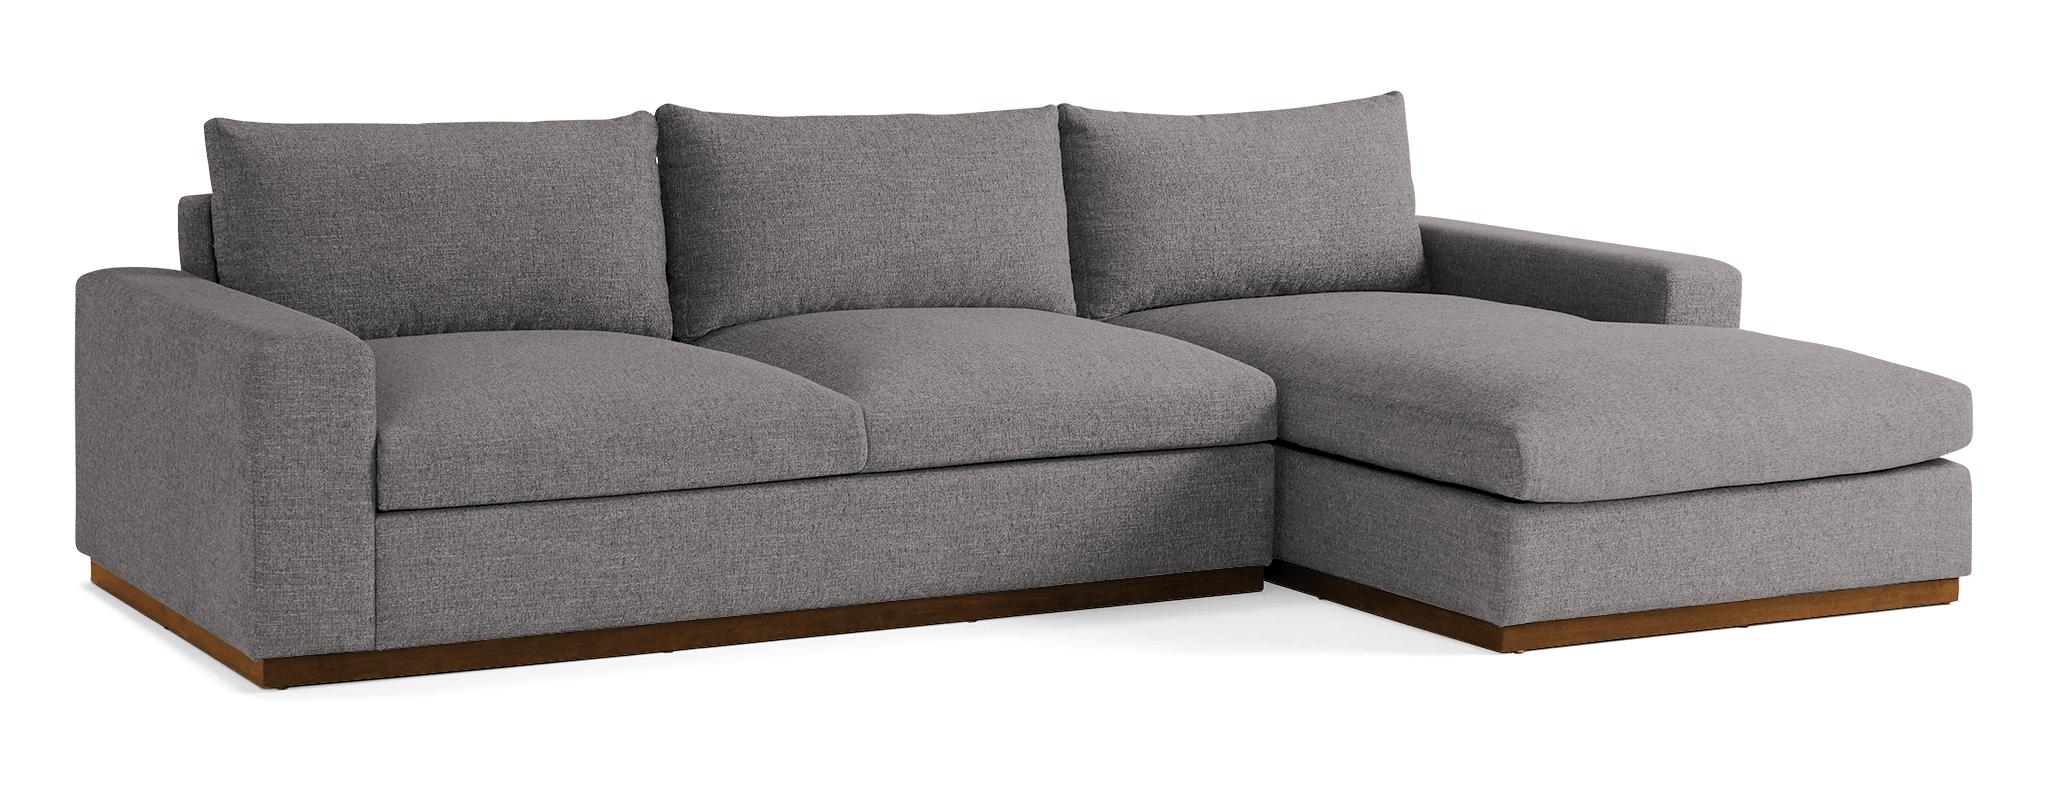 Gray Holt Mid Century Modern Sectional with Storage - Taylor Felt Grey - Mocha - Right - Image 1